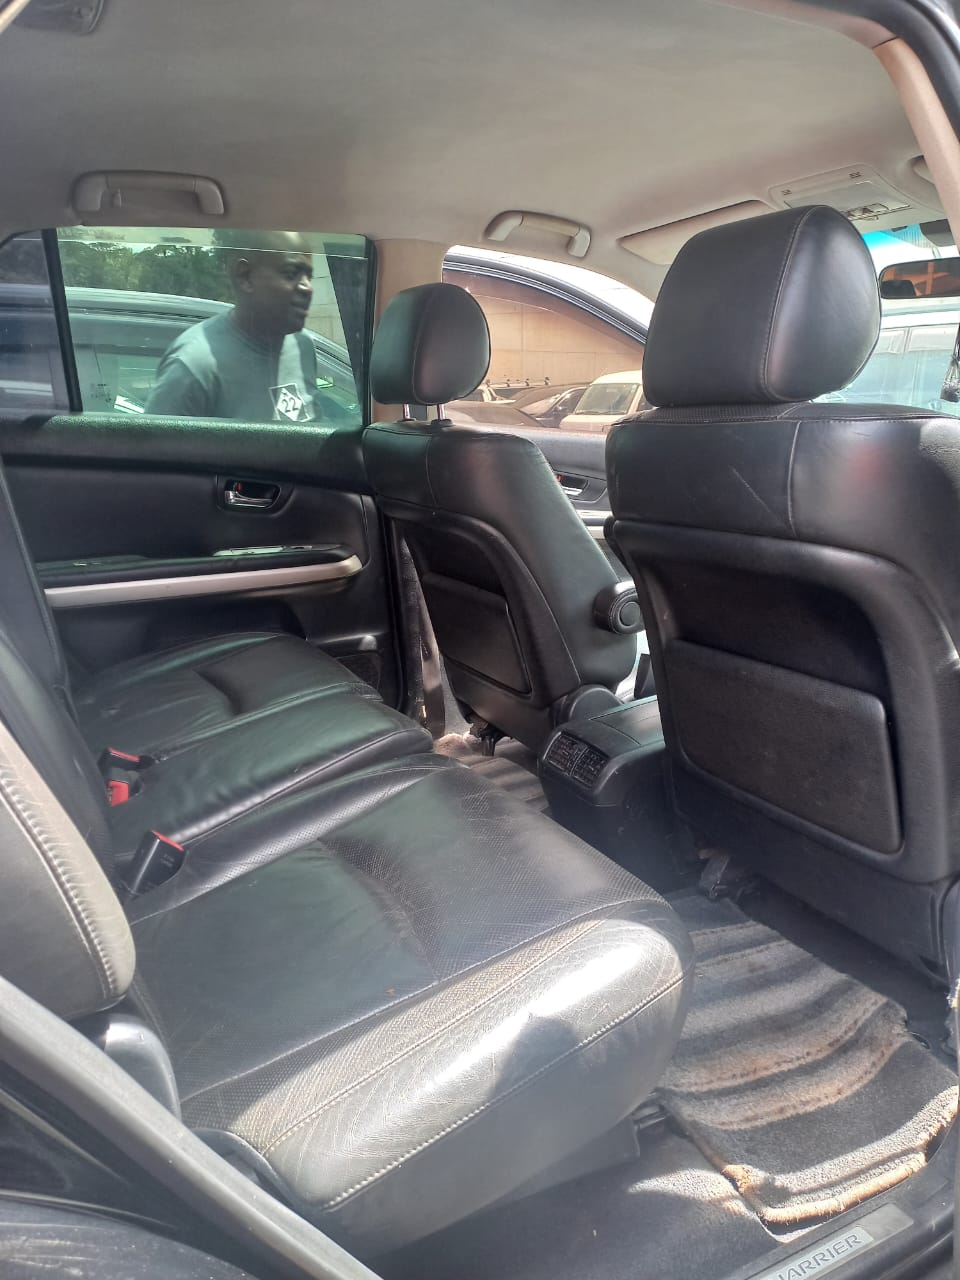 Toyota Harrier 2008 DISTRESS SALE You Pay 30% Deposit Trade in OK EXCLUSIVE